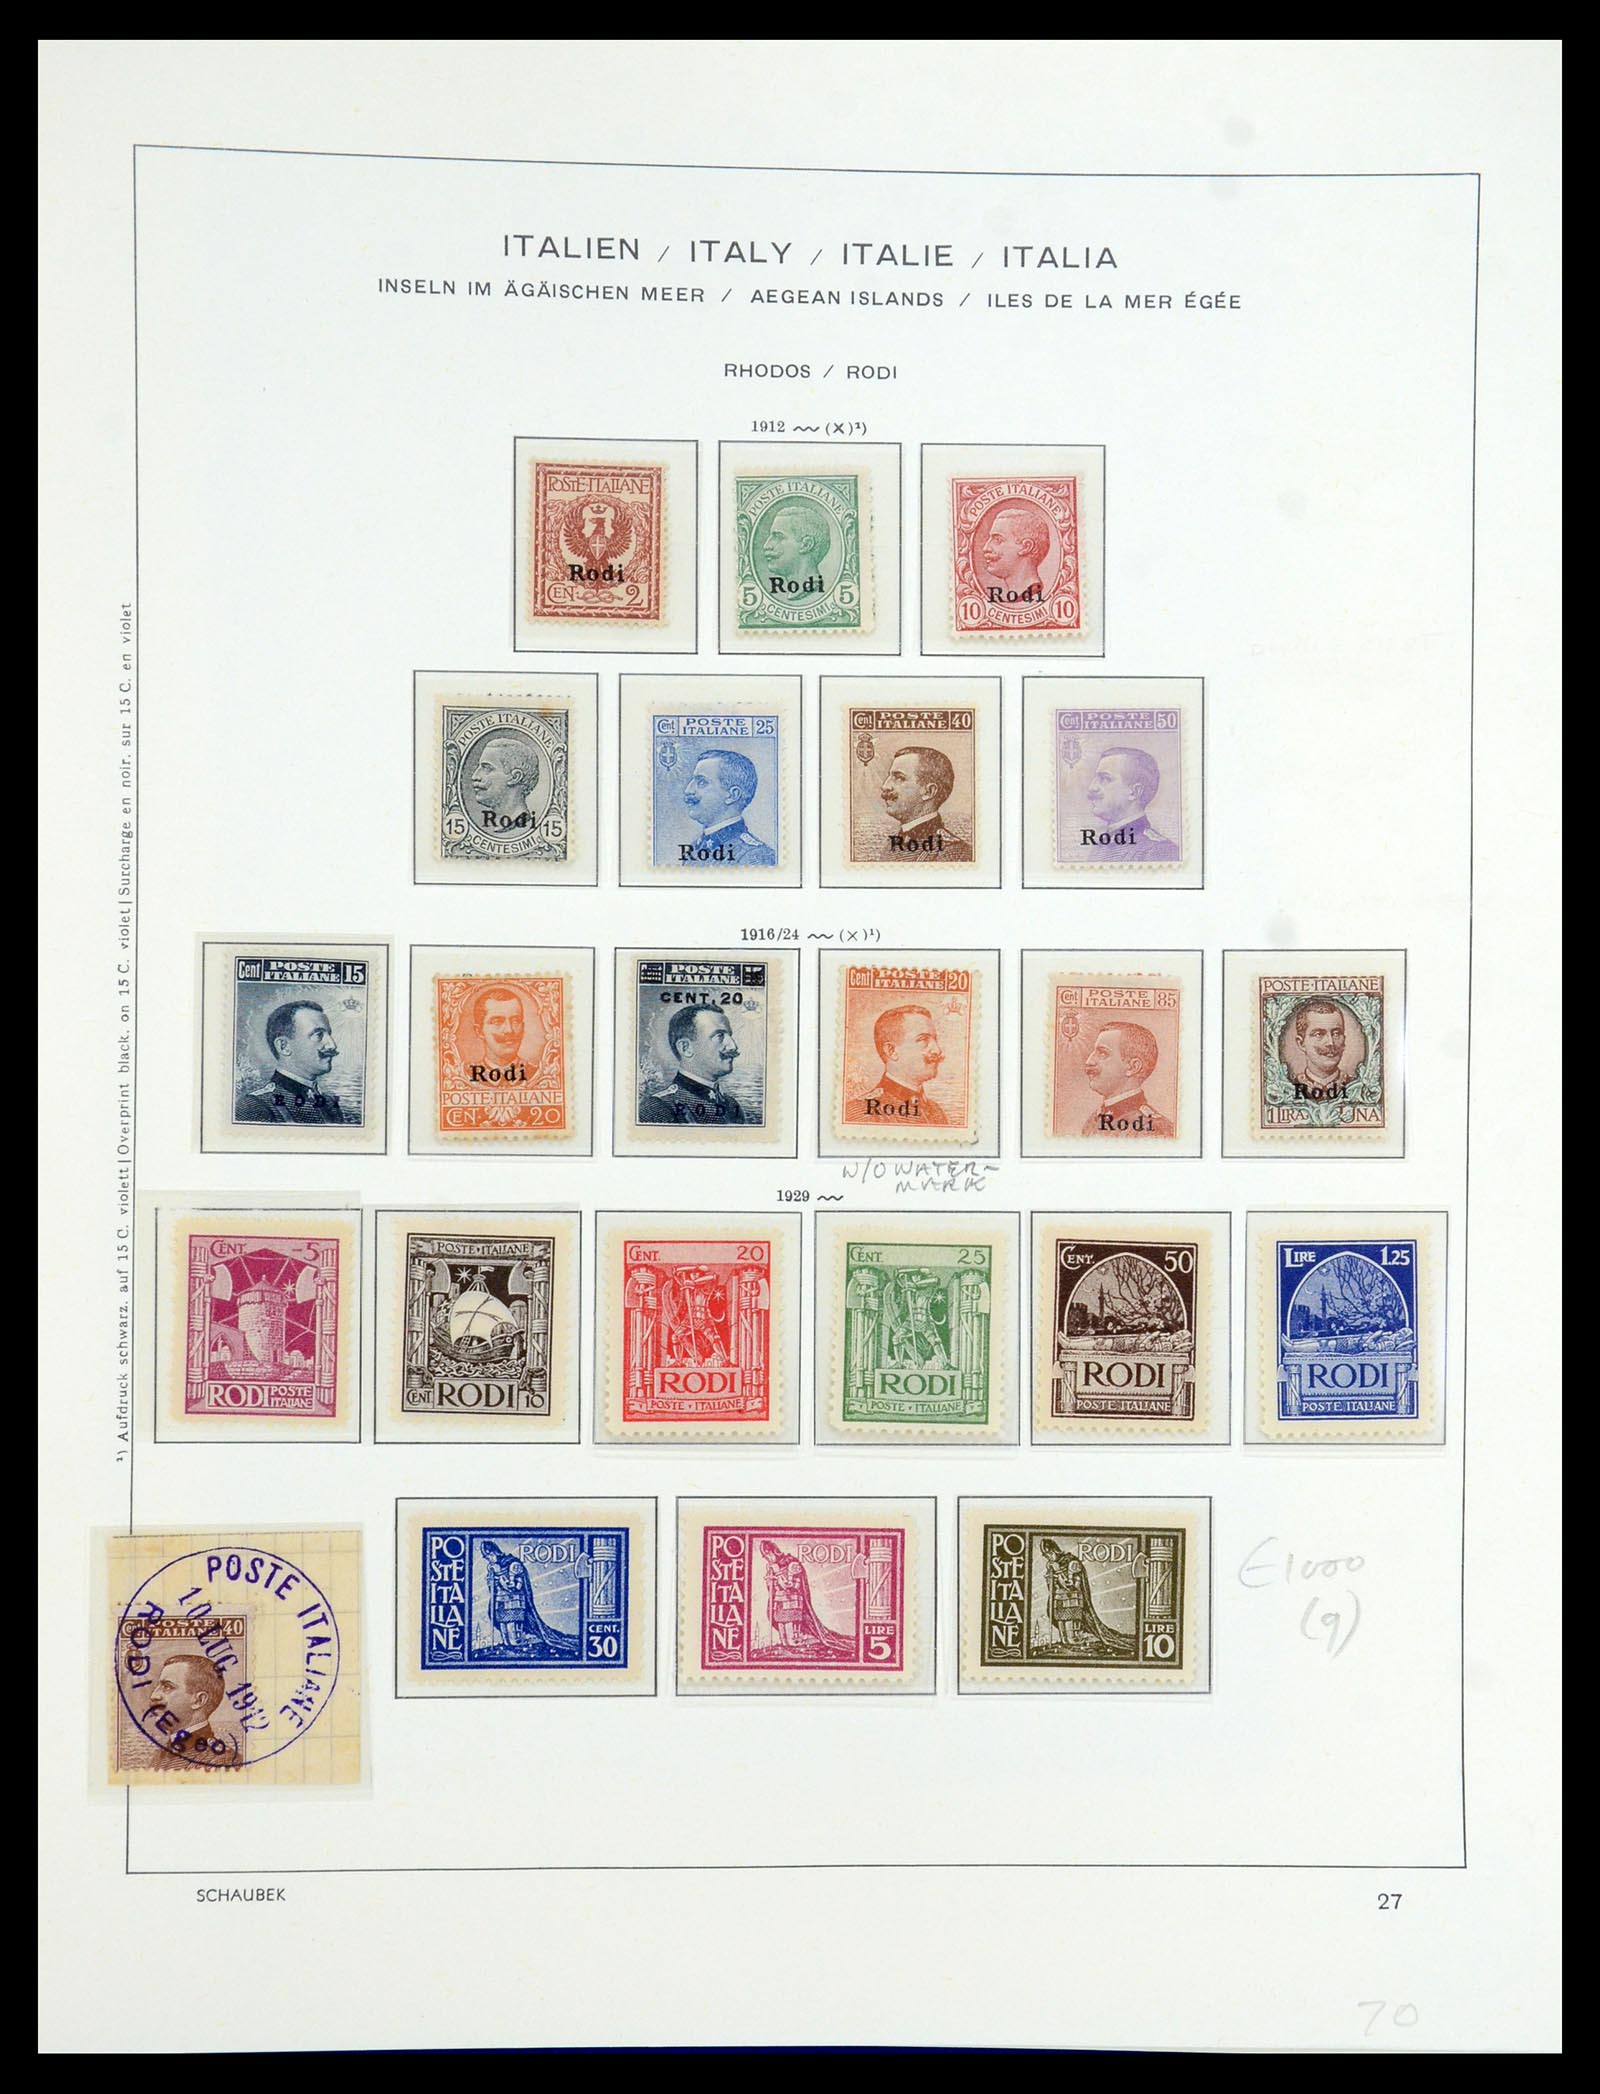 36181 034 - Stamp collection 36181 Italian Aegean Islands 1912-1941.